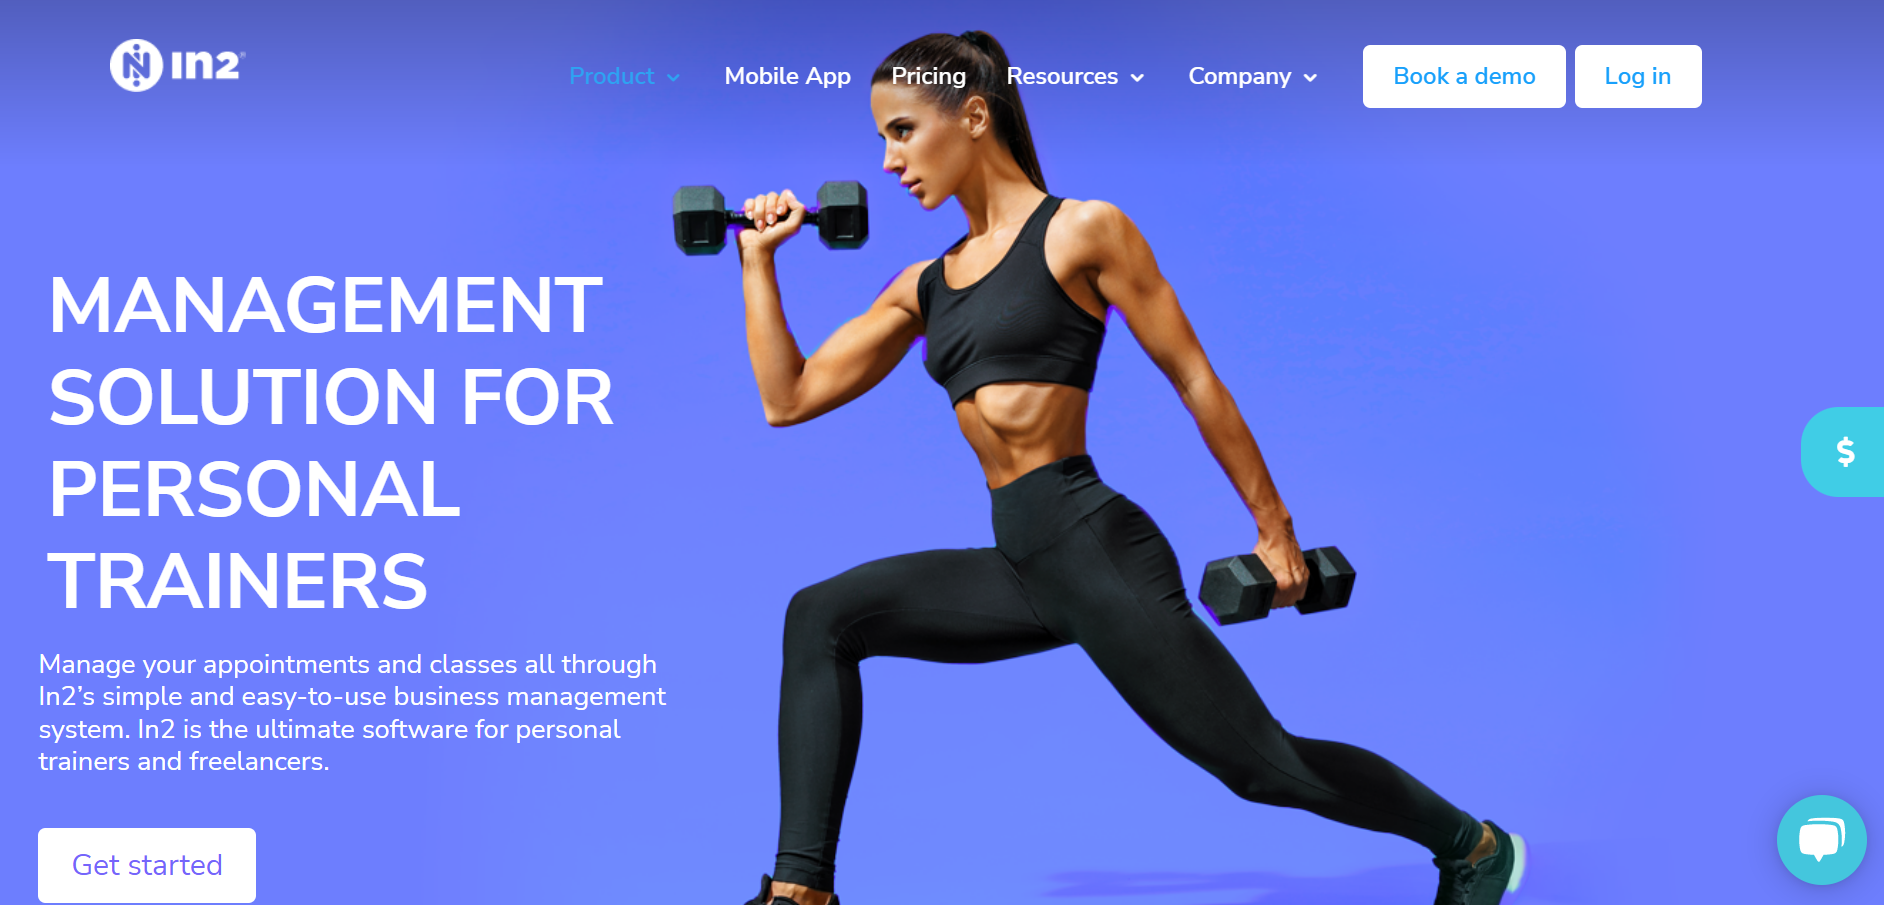 Management Solution For Personal Trainers